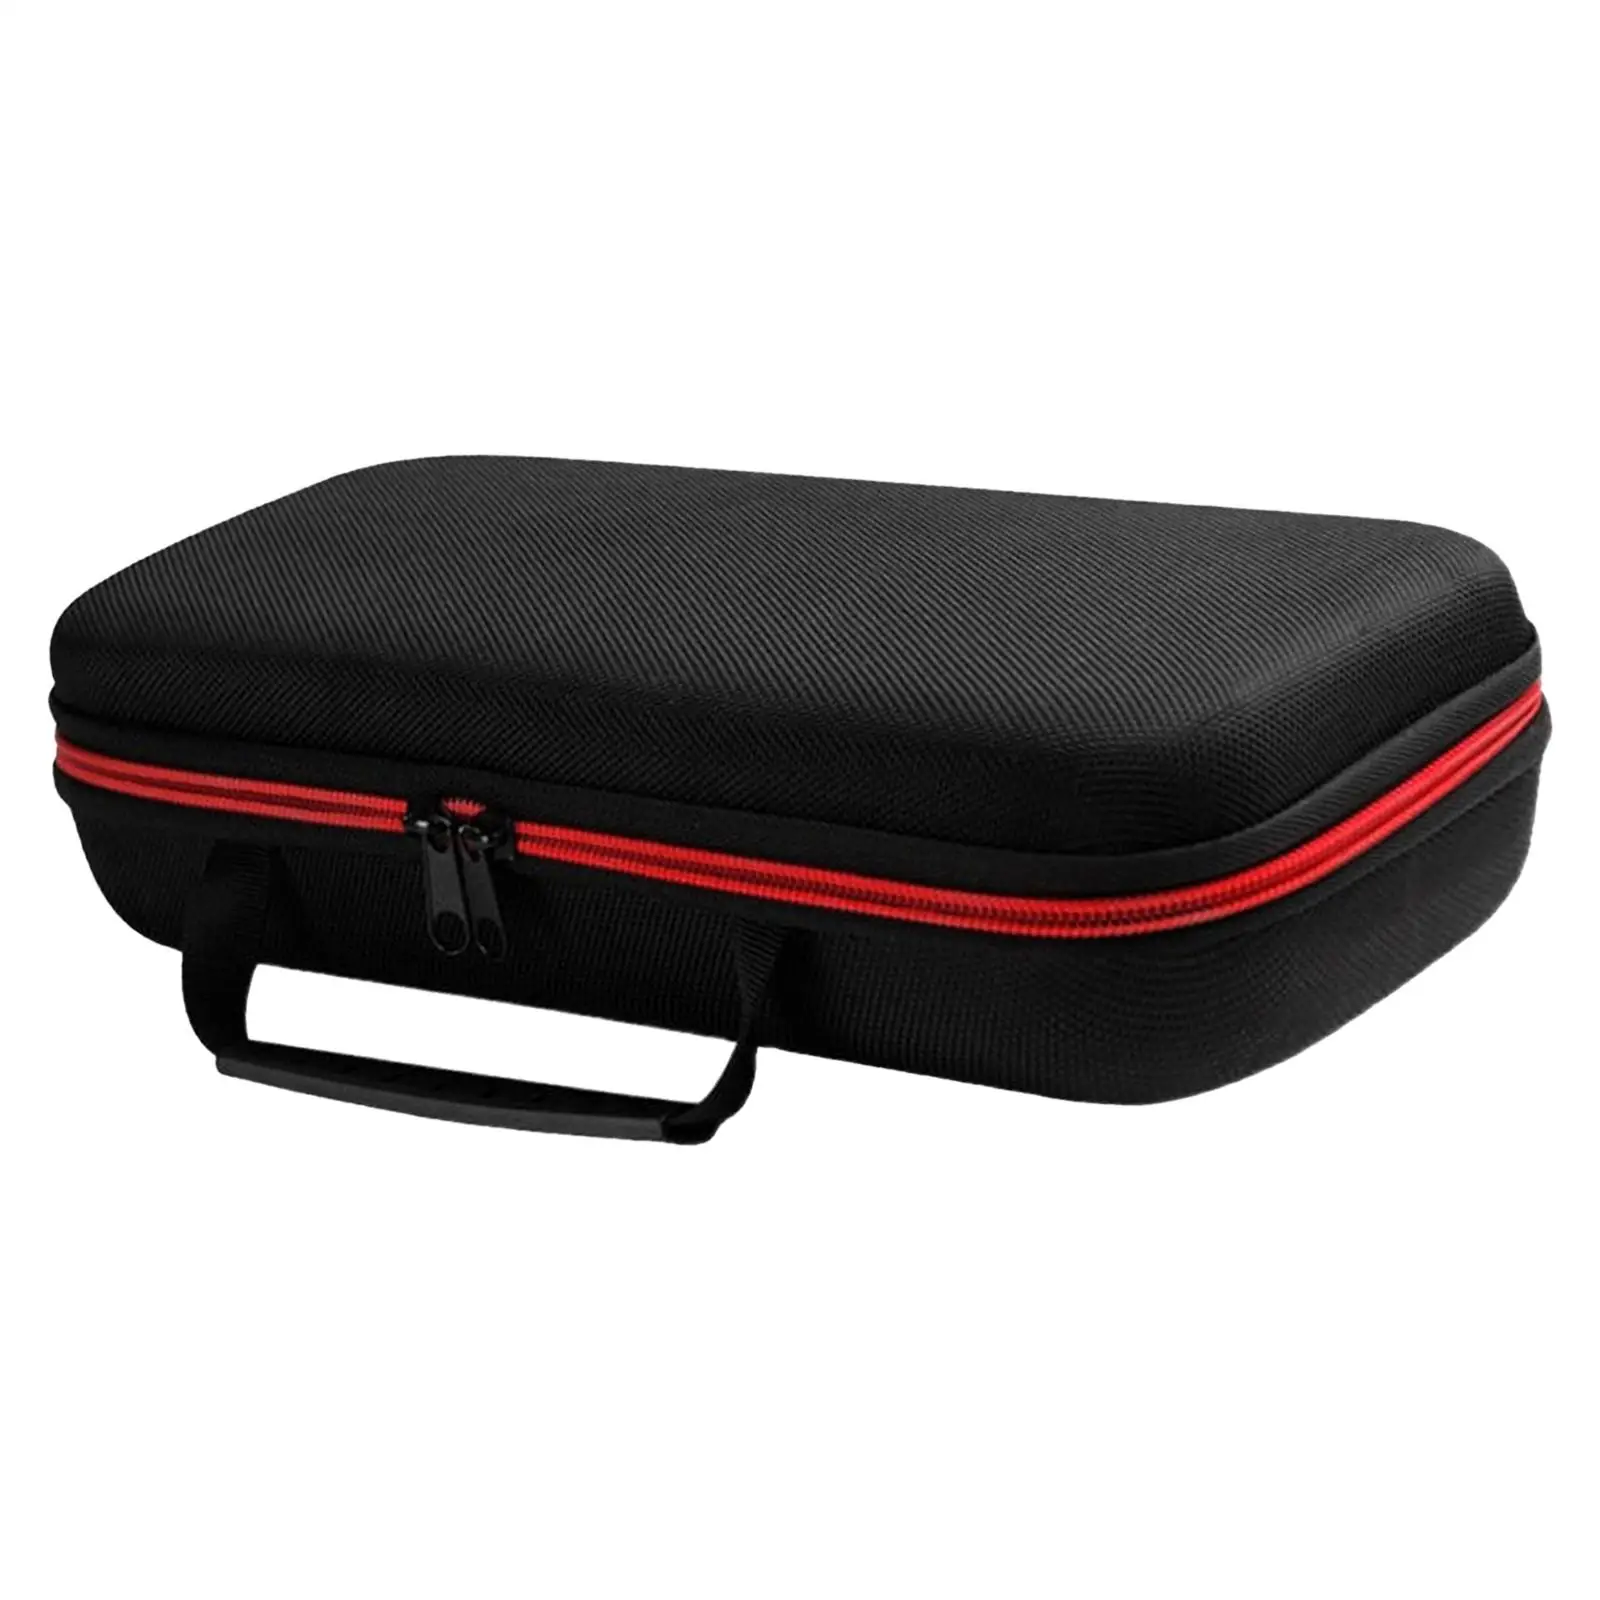 Microphone Storage Case Hard EVA Case Waterproof Water Resistant Organizer Portable Case for Business Outing Travel Trip